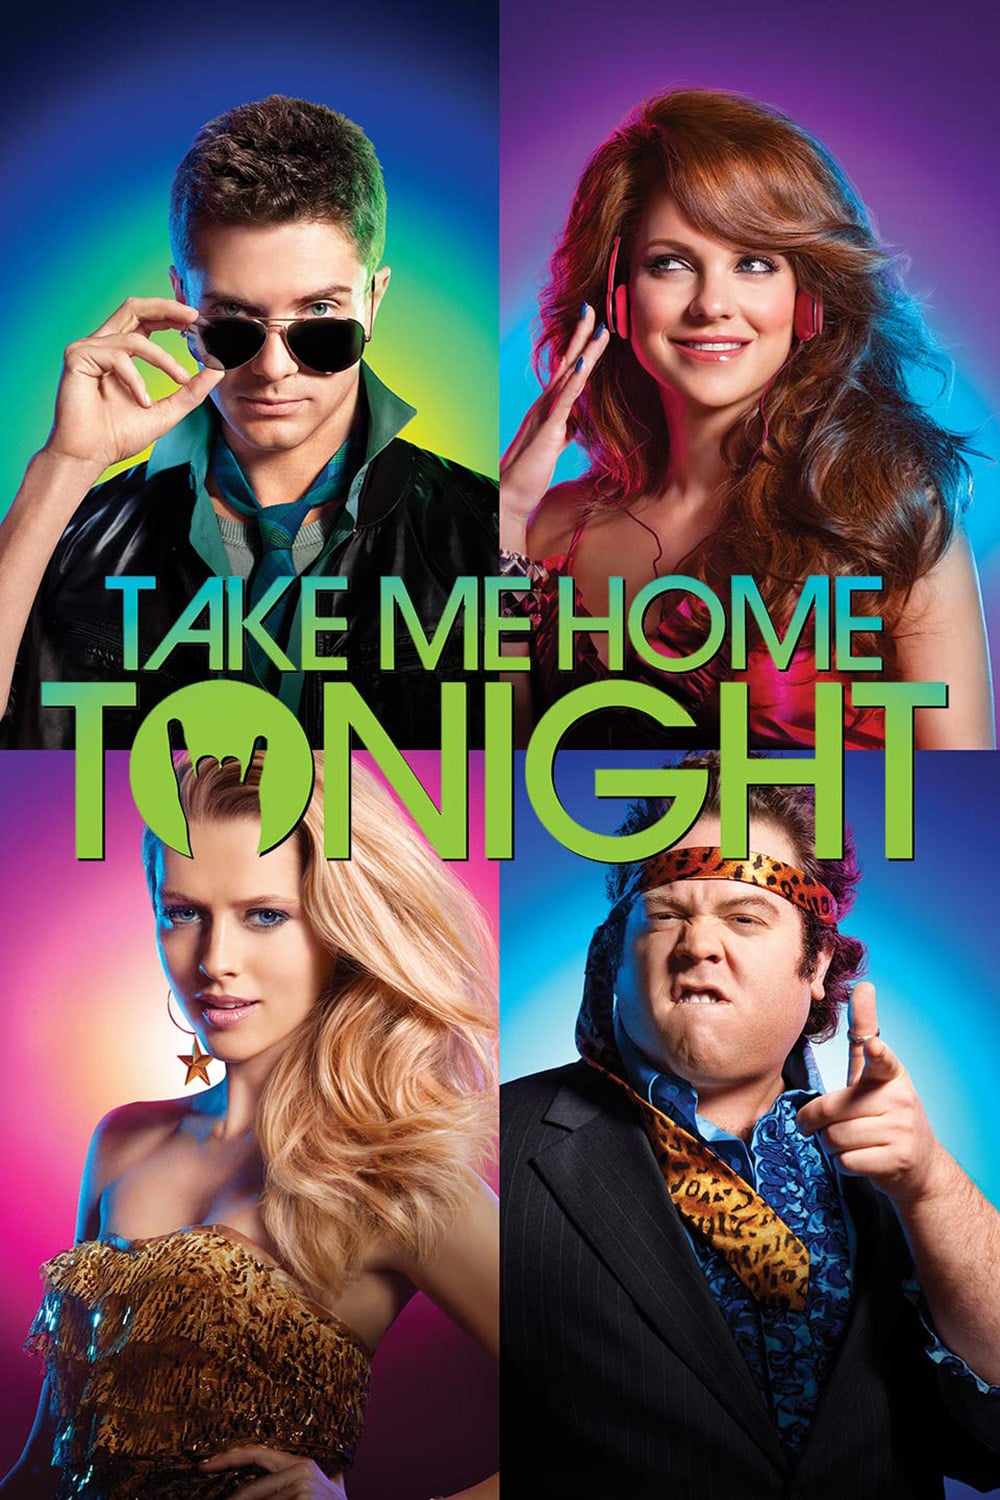 Take Me Home Tonight Images. 